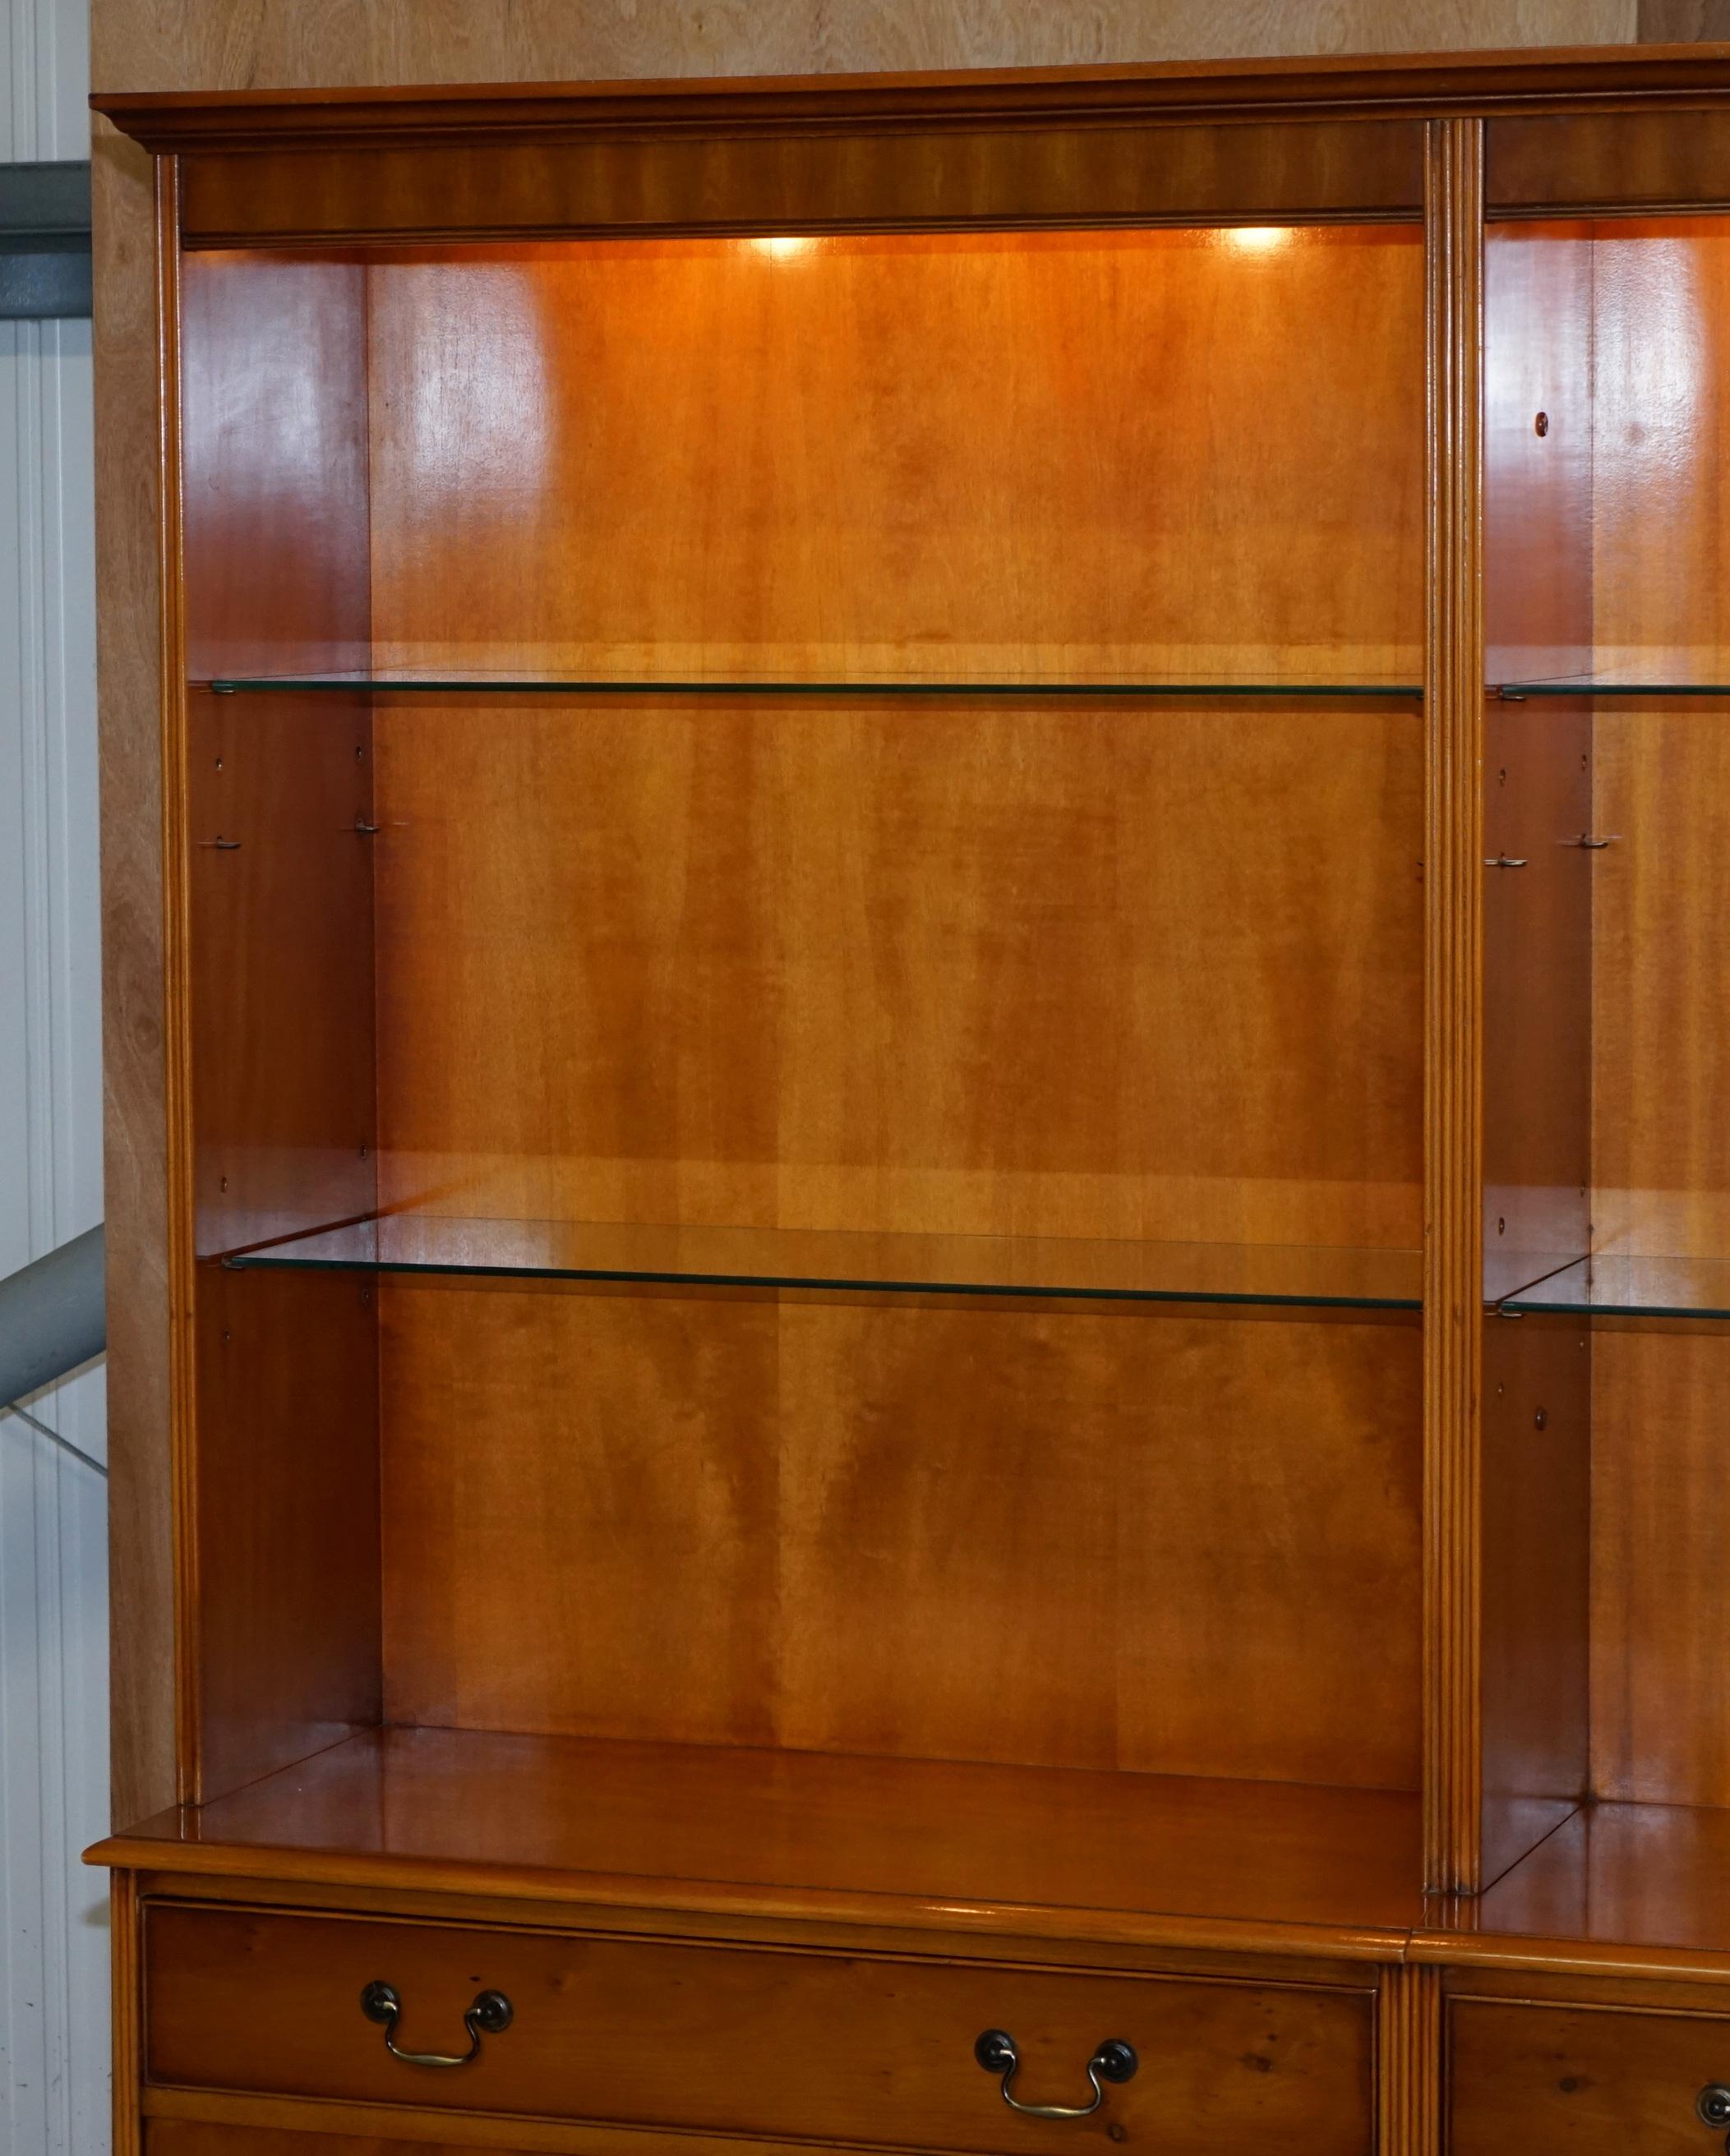 We are delighted to offer for sale this stunning very decorative Bradley Furniture triple bank Library bookcase or display cabinet with glass shelves and lights 

A very good looking and well made piece. Bradley furniture make some of the finest